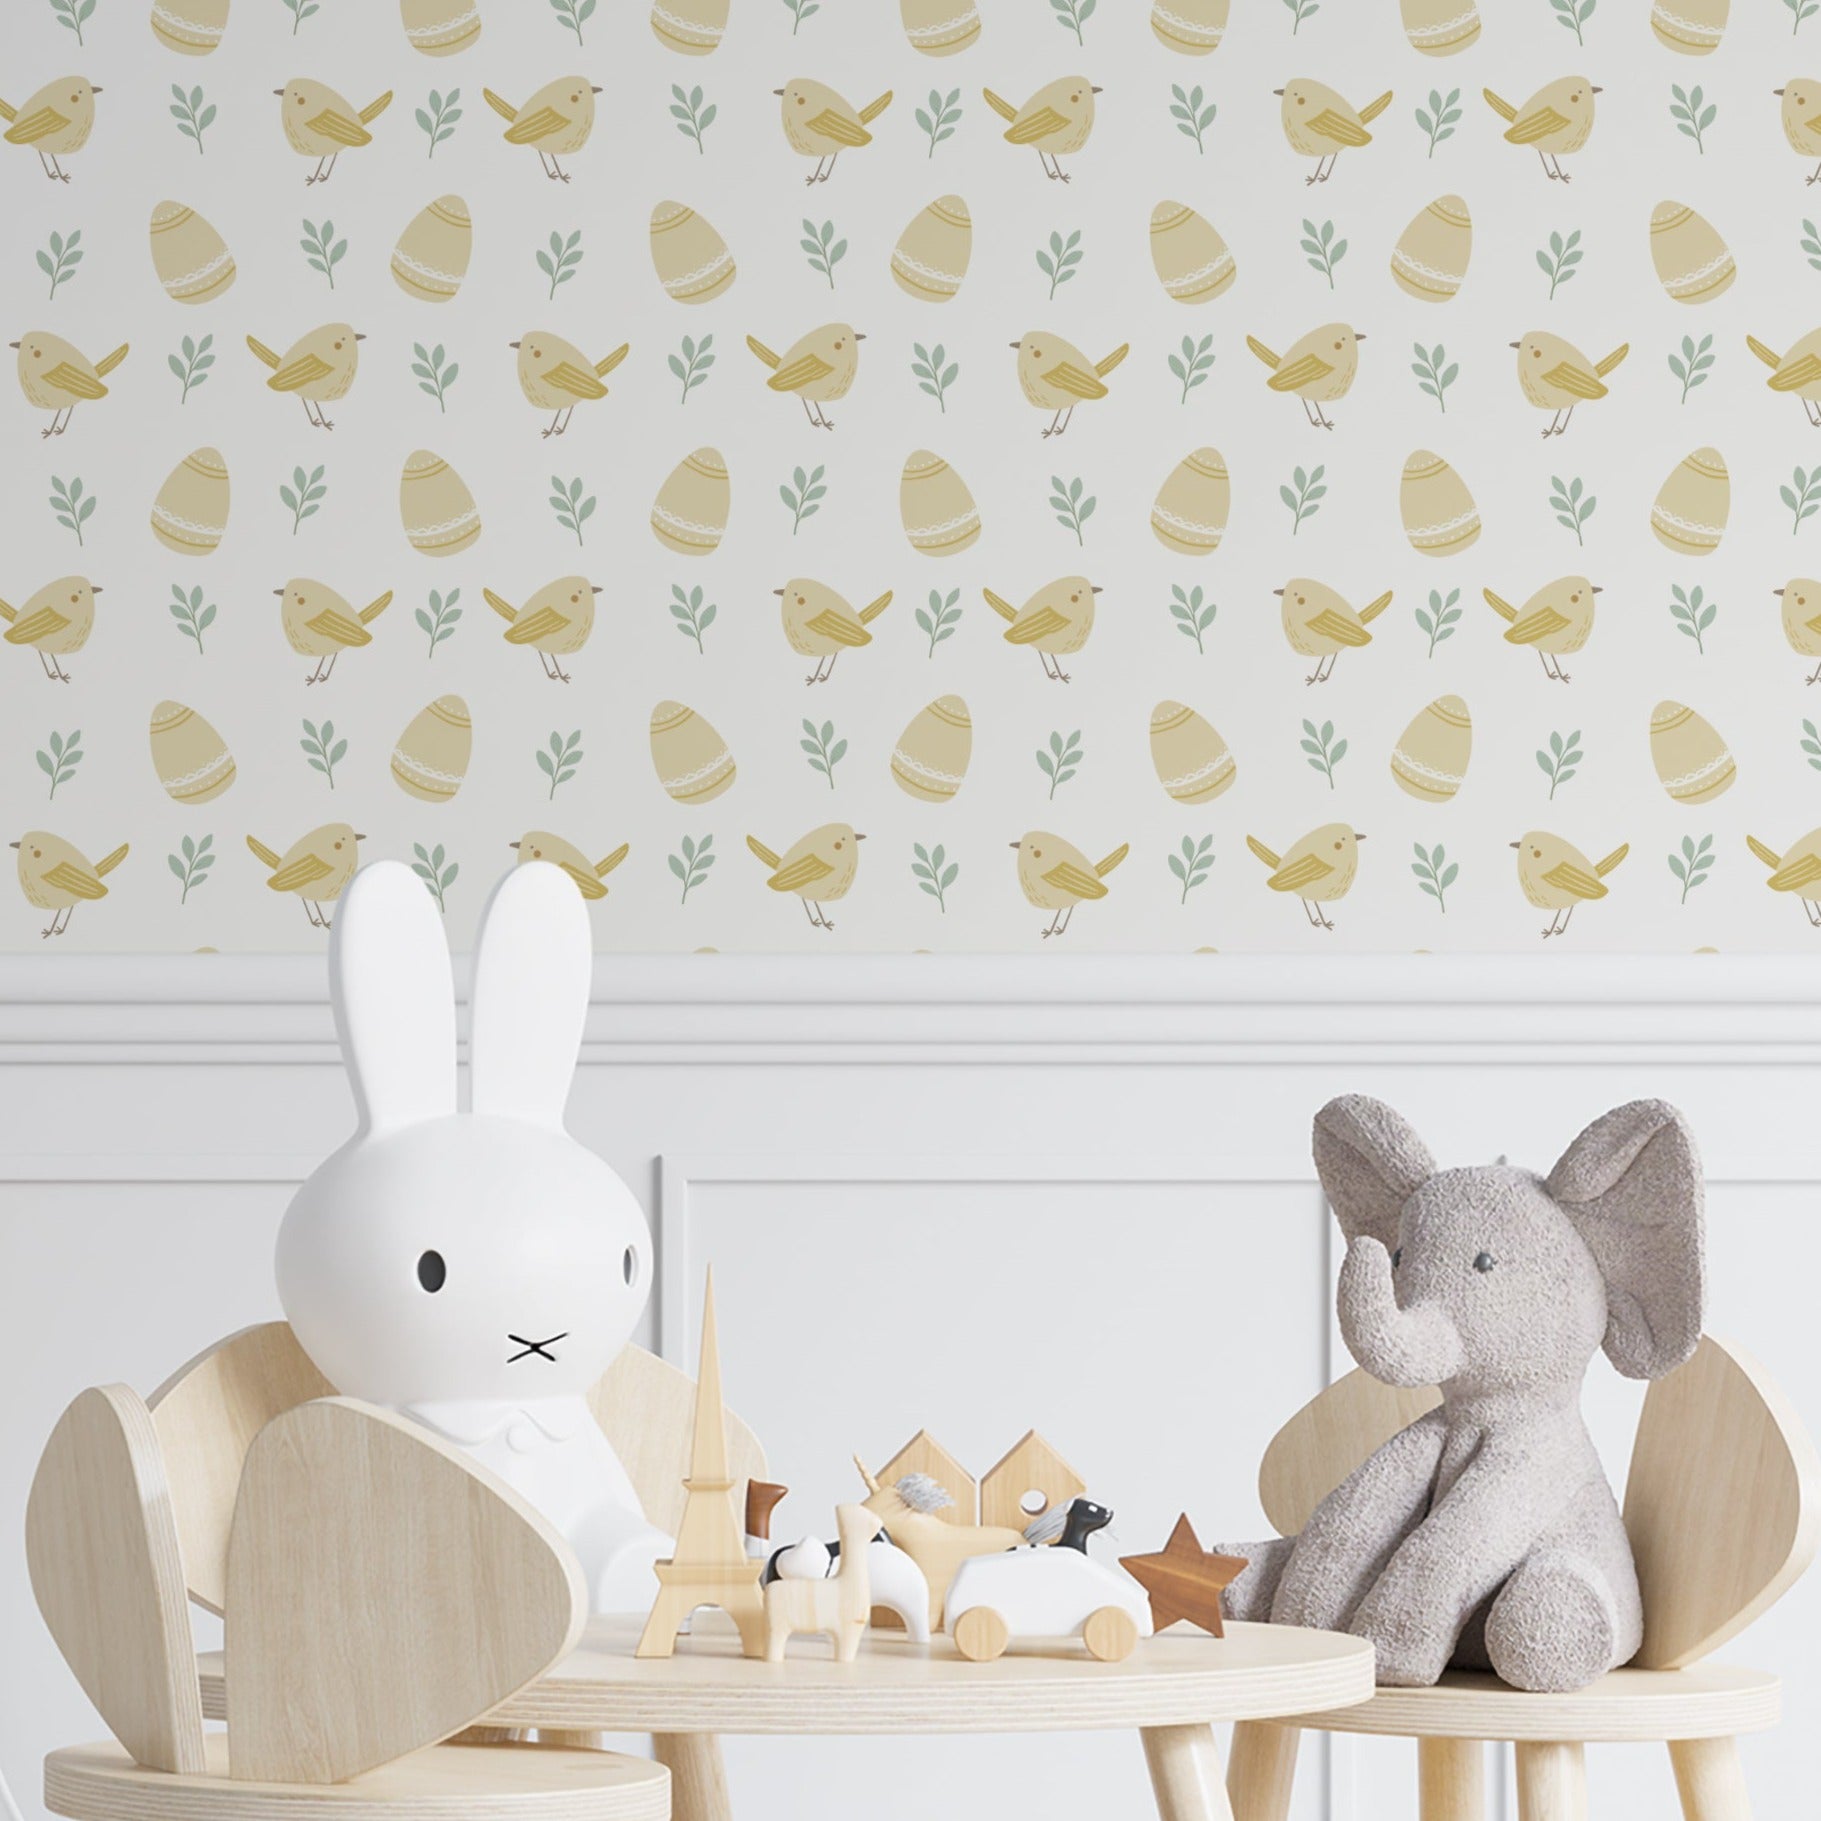 Children's room with a wall covered in 'Nursery Baby Chick Wallpaper' showing a pattern of yellow chicks and Easter eggs. Decor includes a wooden chair with a rabbit figure and a toy elephant on the table